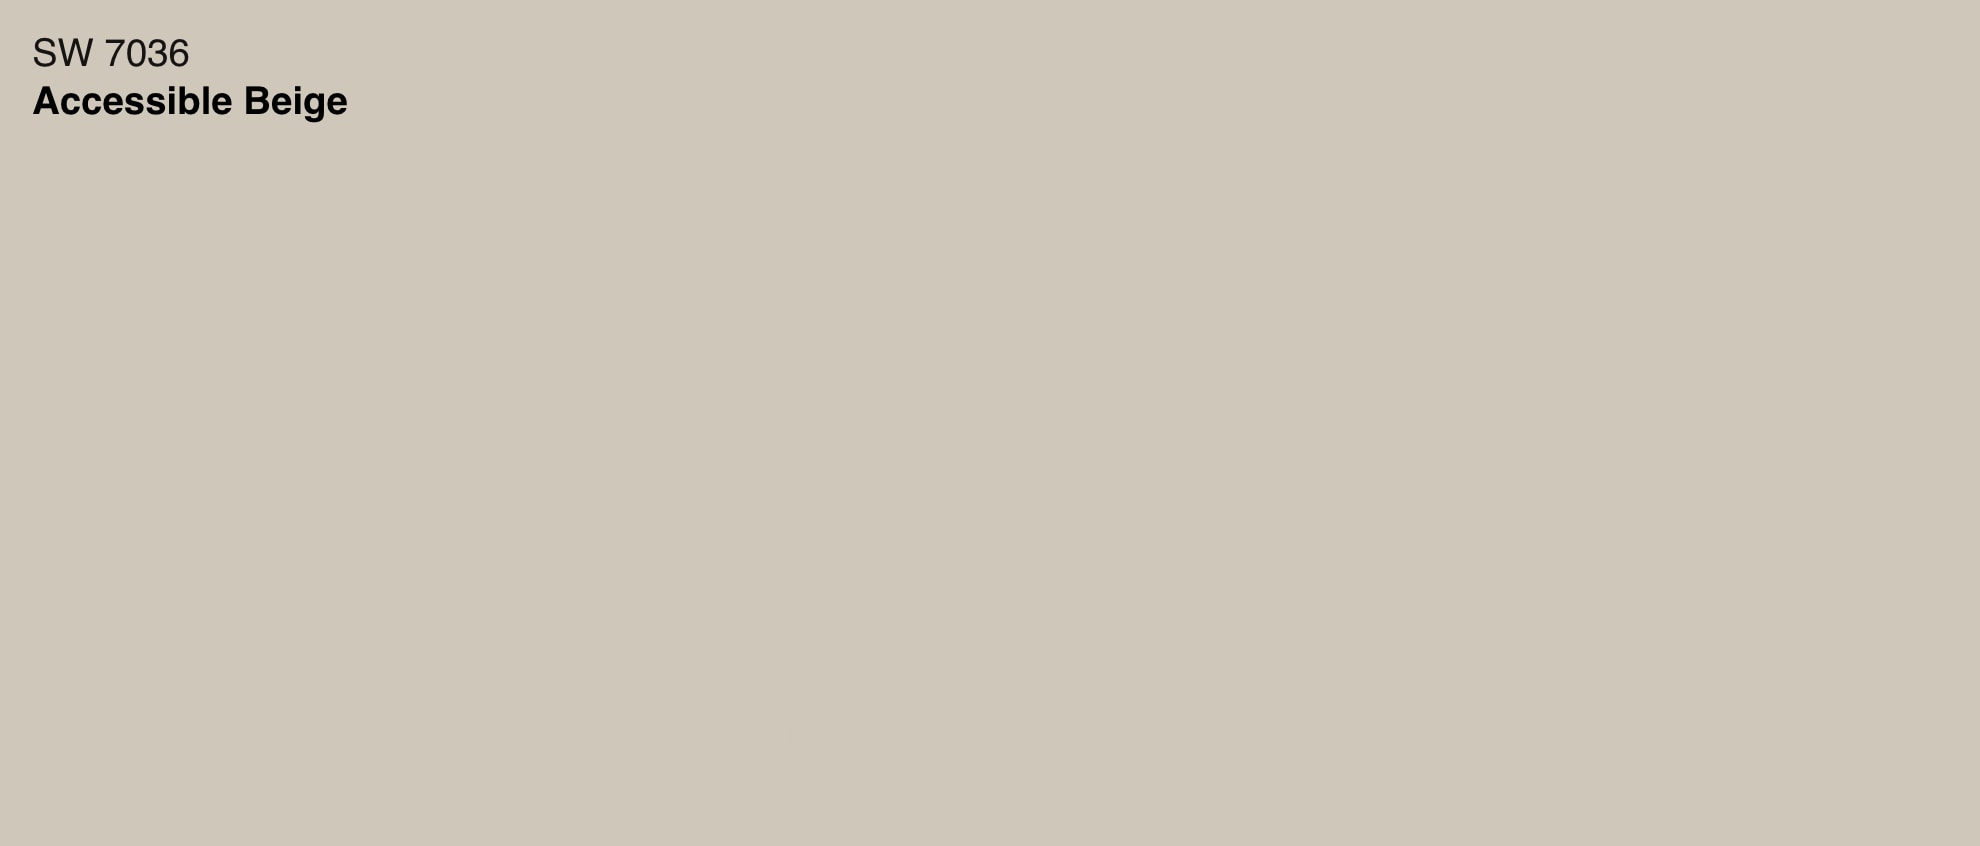 sherwin williams accessible beige swatch